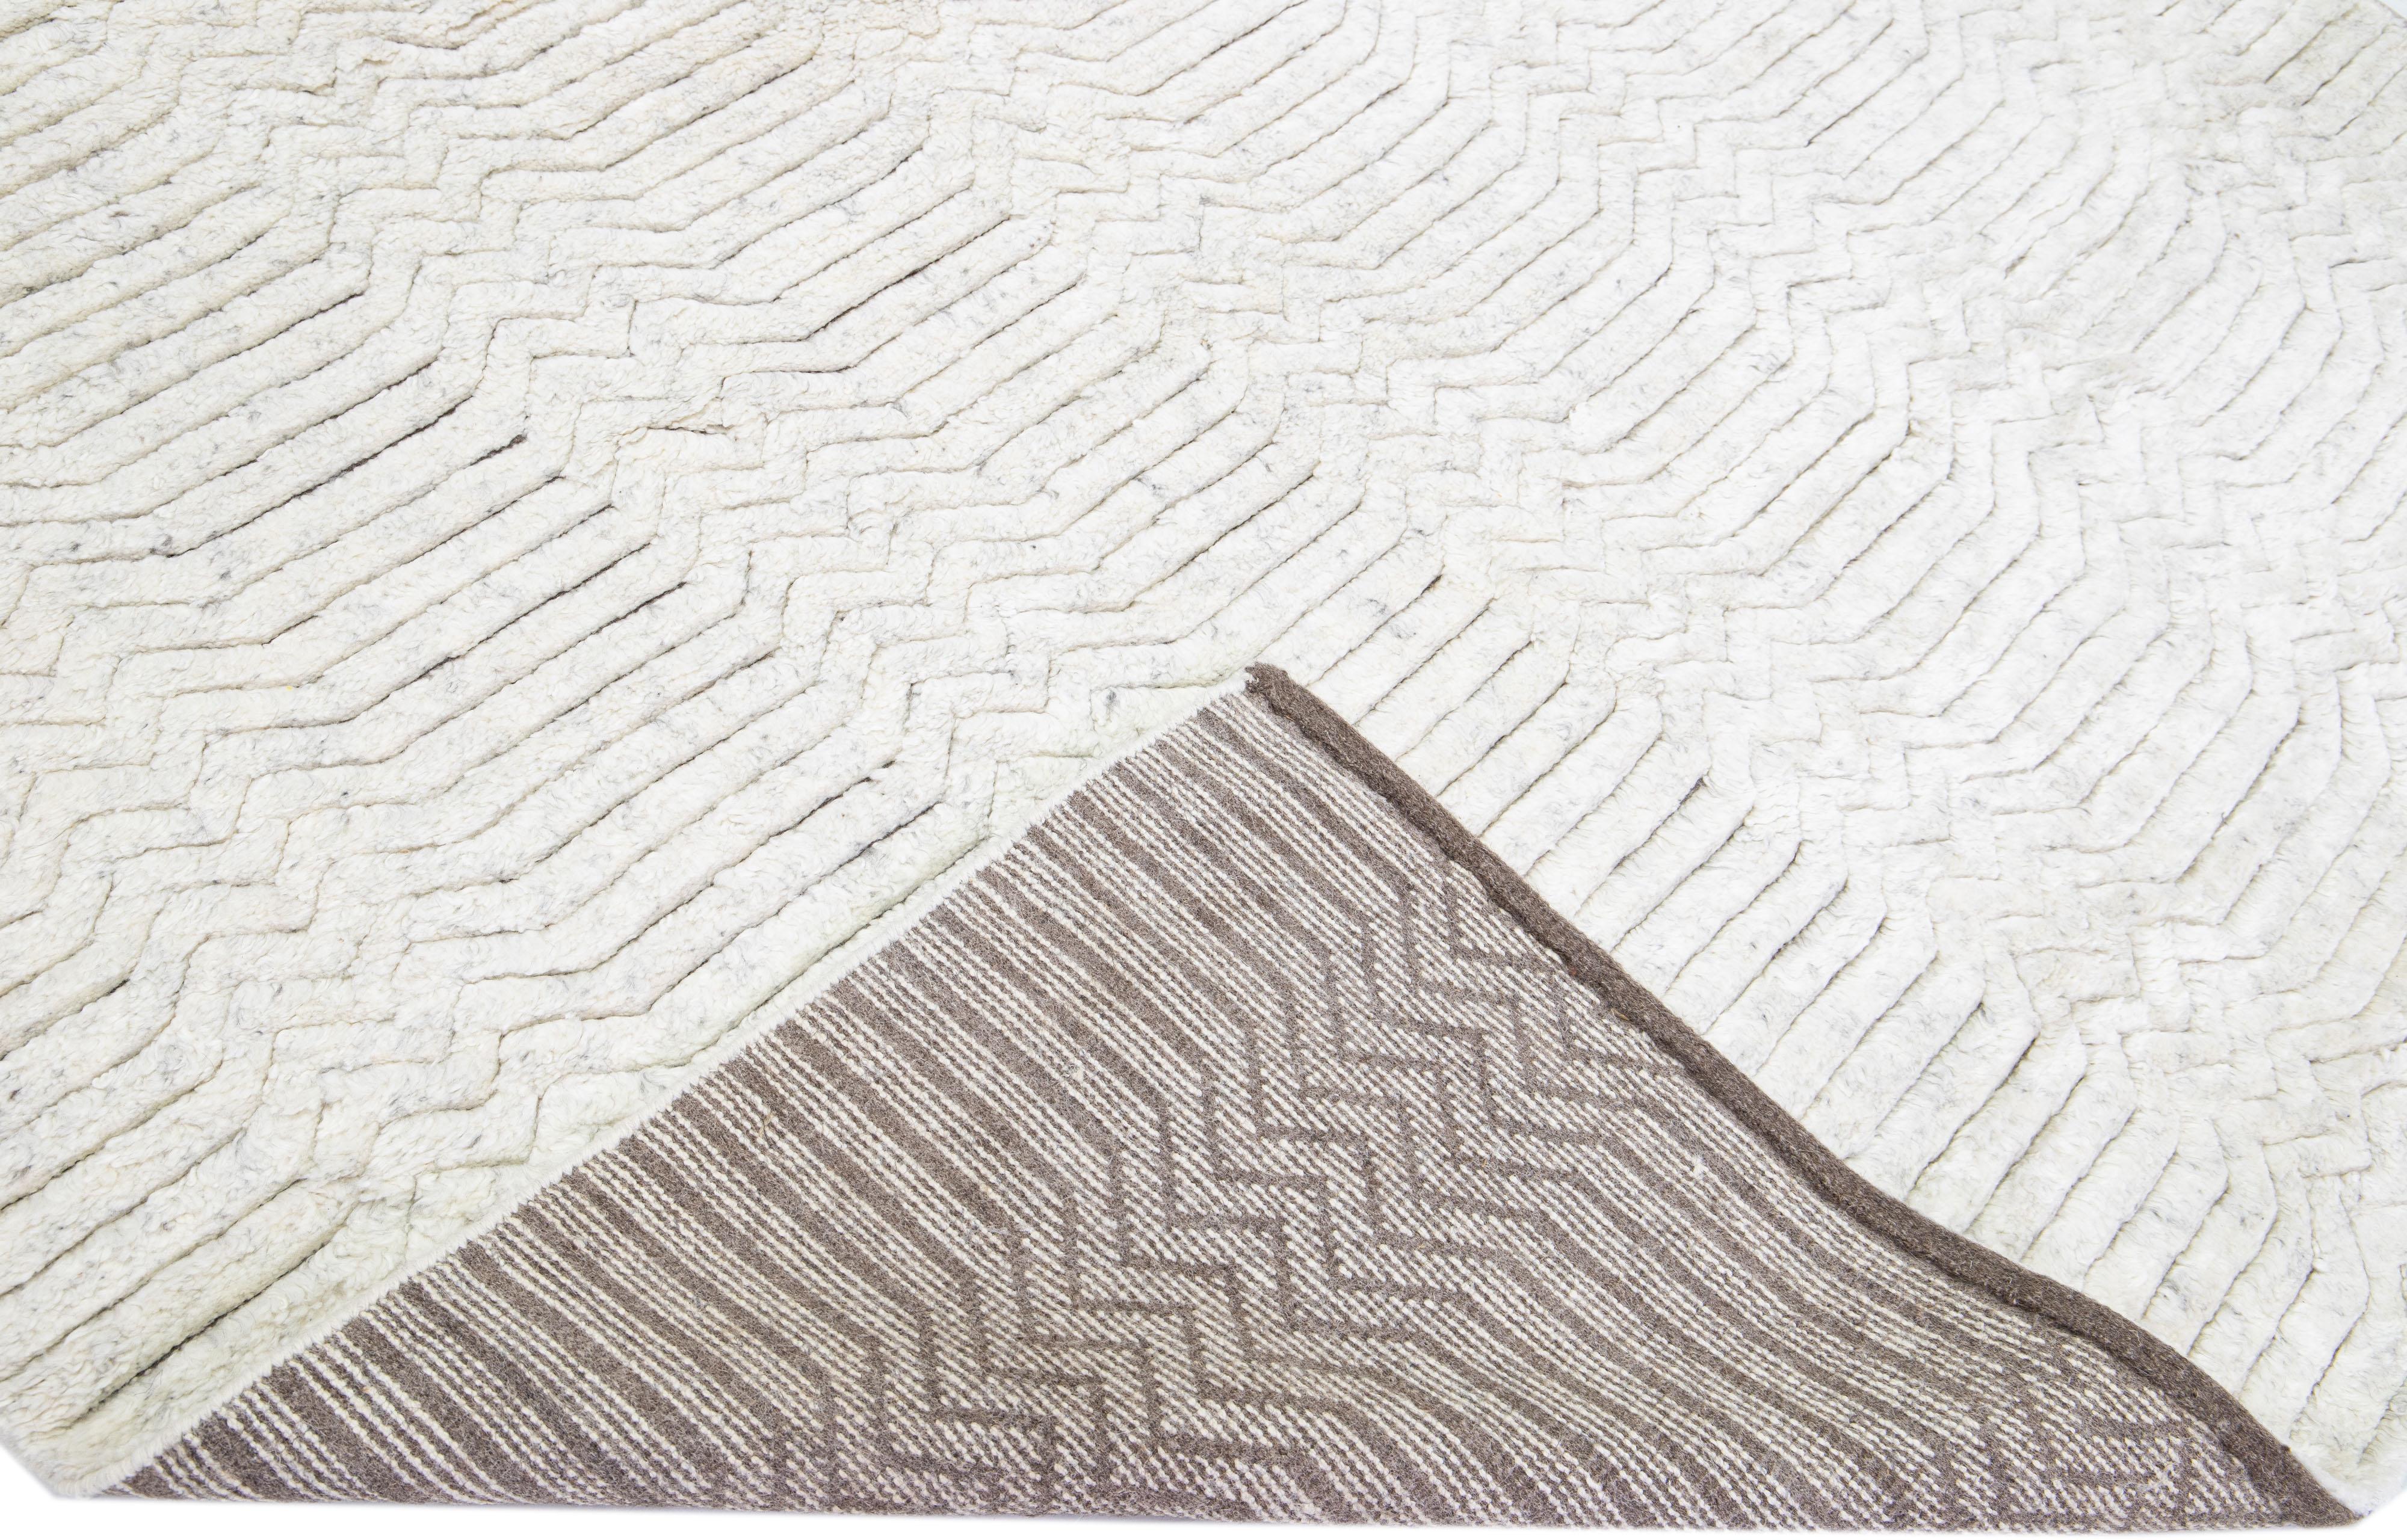 Beautiful Contemporary Thom Filicia Home Collection Rugs. This Indian hand-knotted rug is made of wool & viscose and has a gray field and ivory accents all over the design. 
Thom Filicia´s eye for exquisite detailing and beautiful texture shines